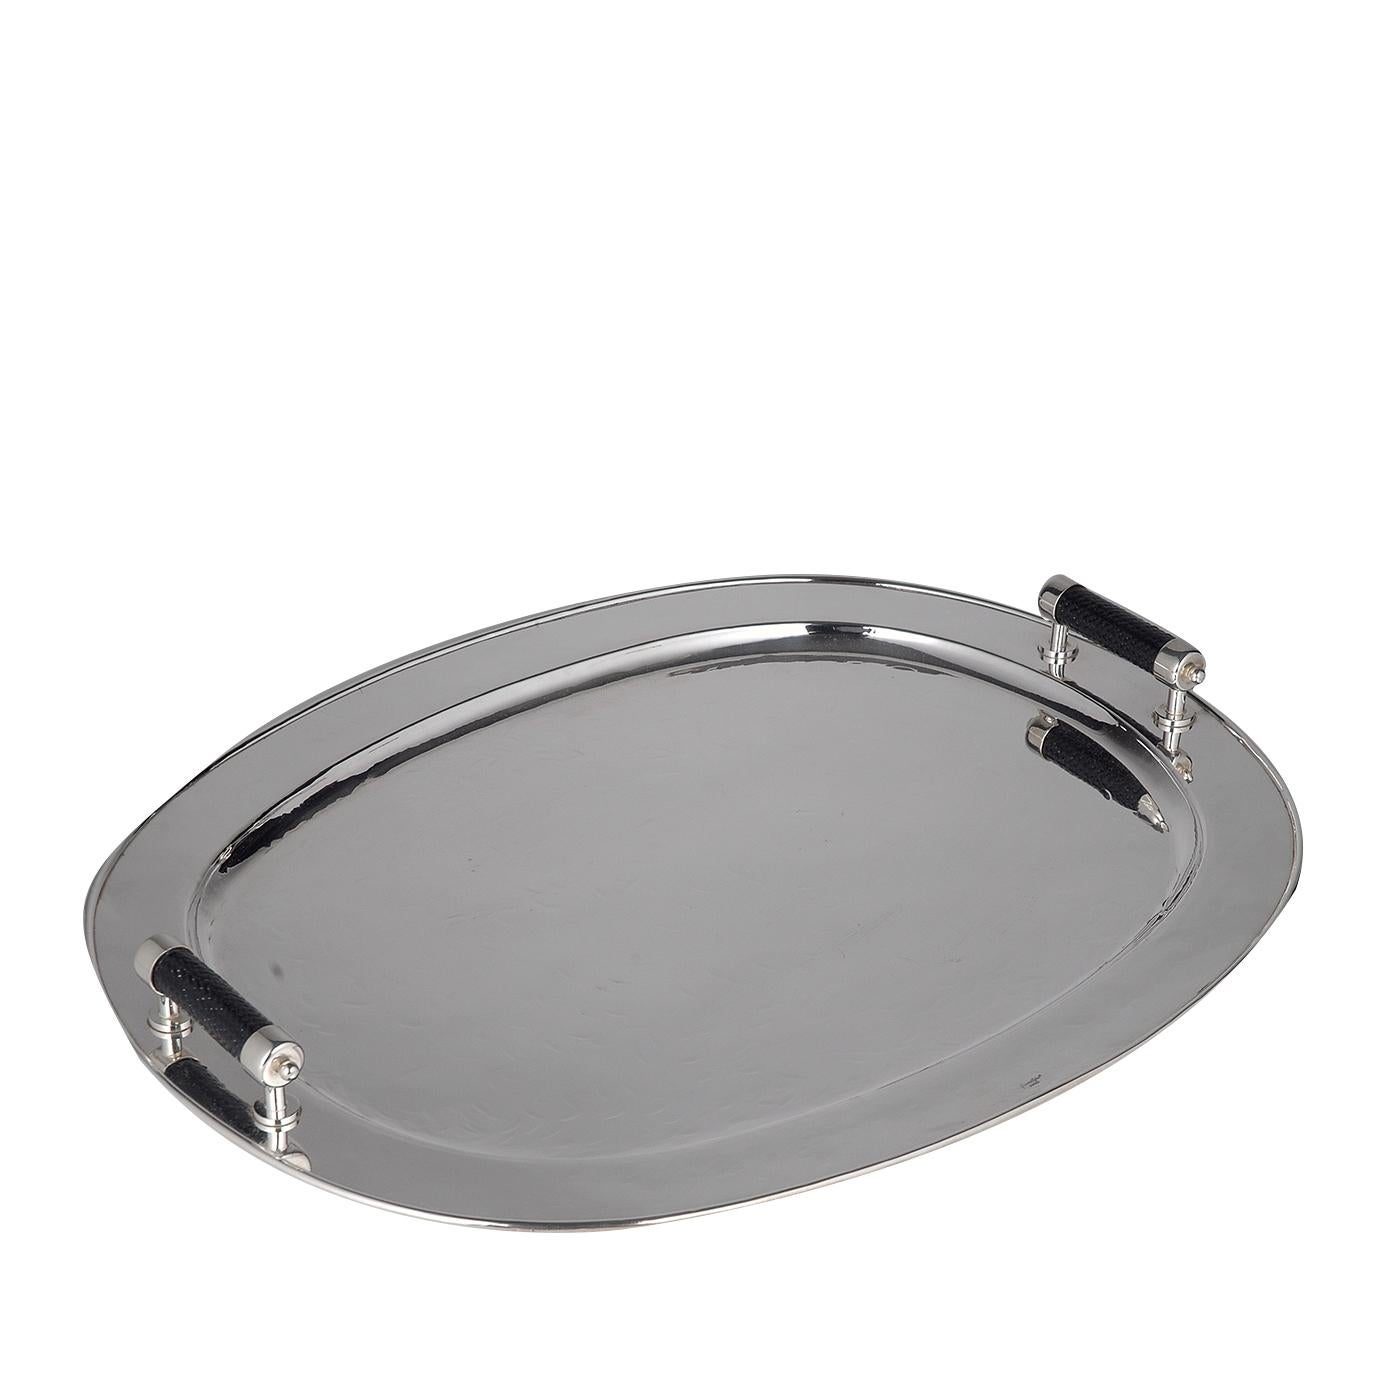 Classic and sophisticated, this tray will complement an elegant decor and can be used in the dining room or living room, either alone or combined with other pieces by the same designers, all in silver plated metal and distinctive for their exquisite